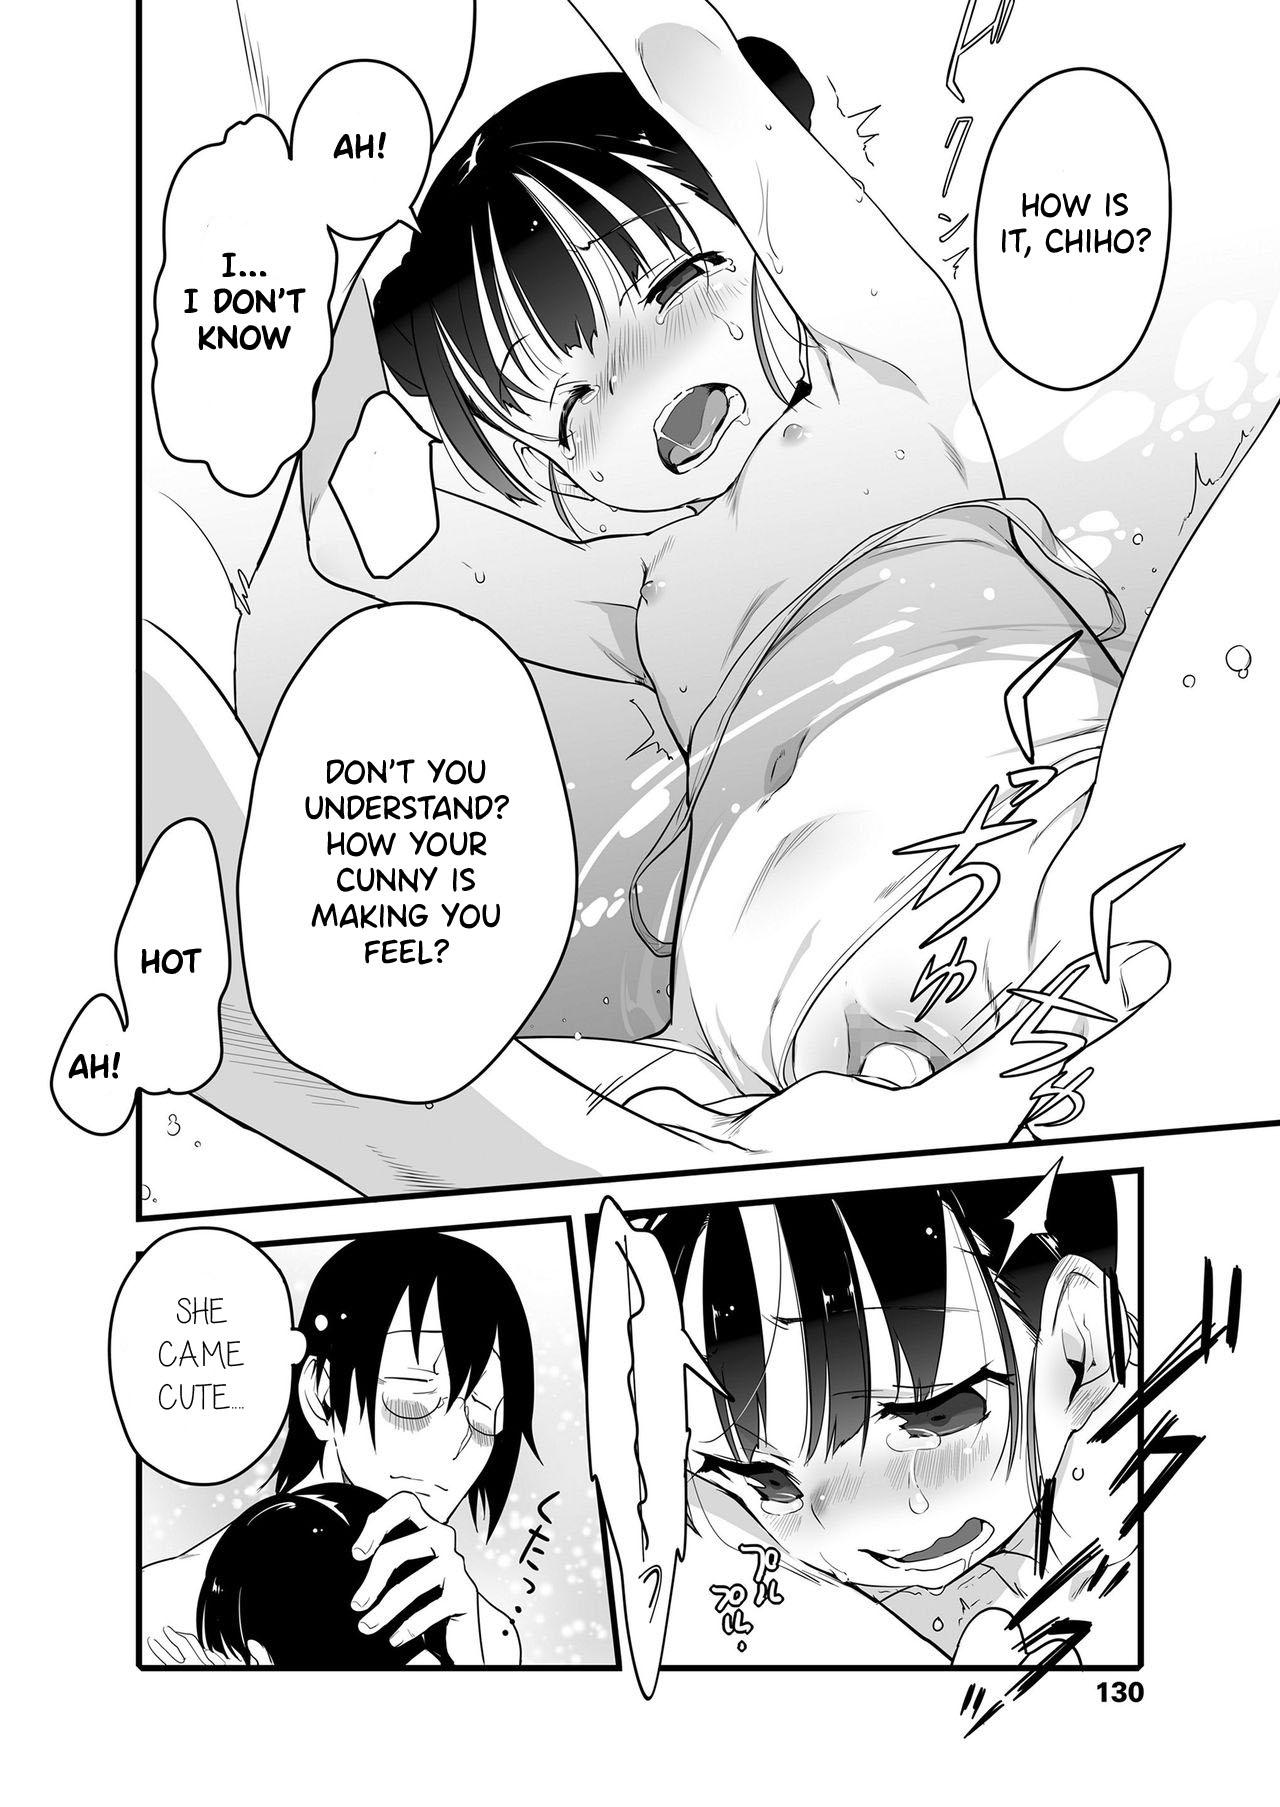 Ass Sex Uchiage Hanabi, Ane to Miruka? Imouto to Miruka? | Fireworks, Should we see it with the elder sister or the younger sister? Amador - Page 12